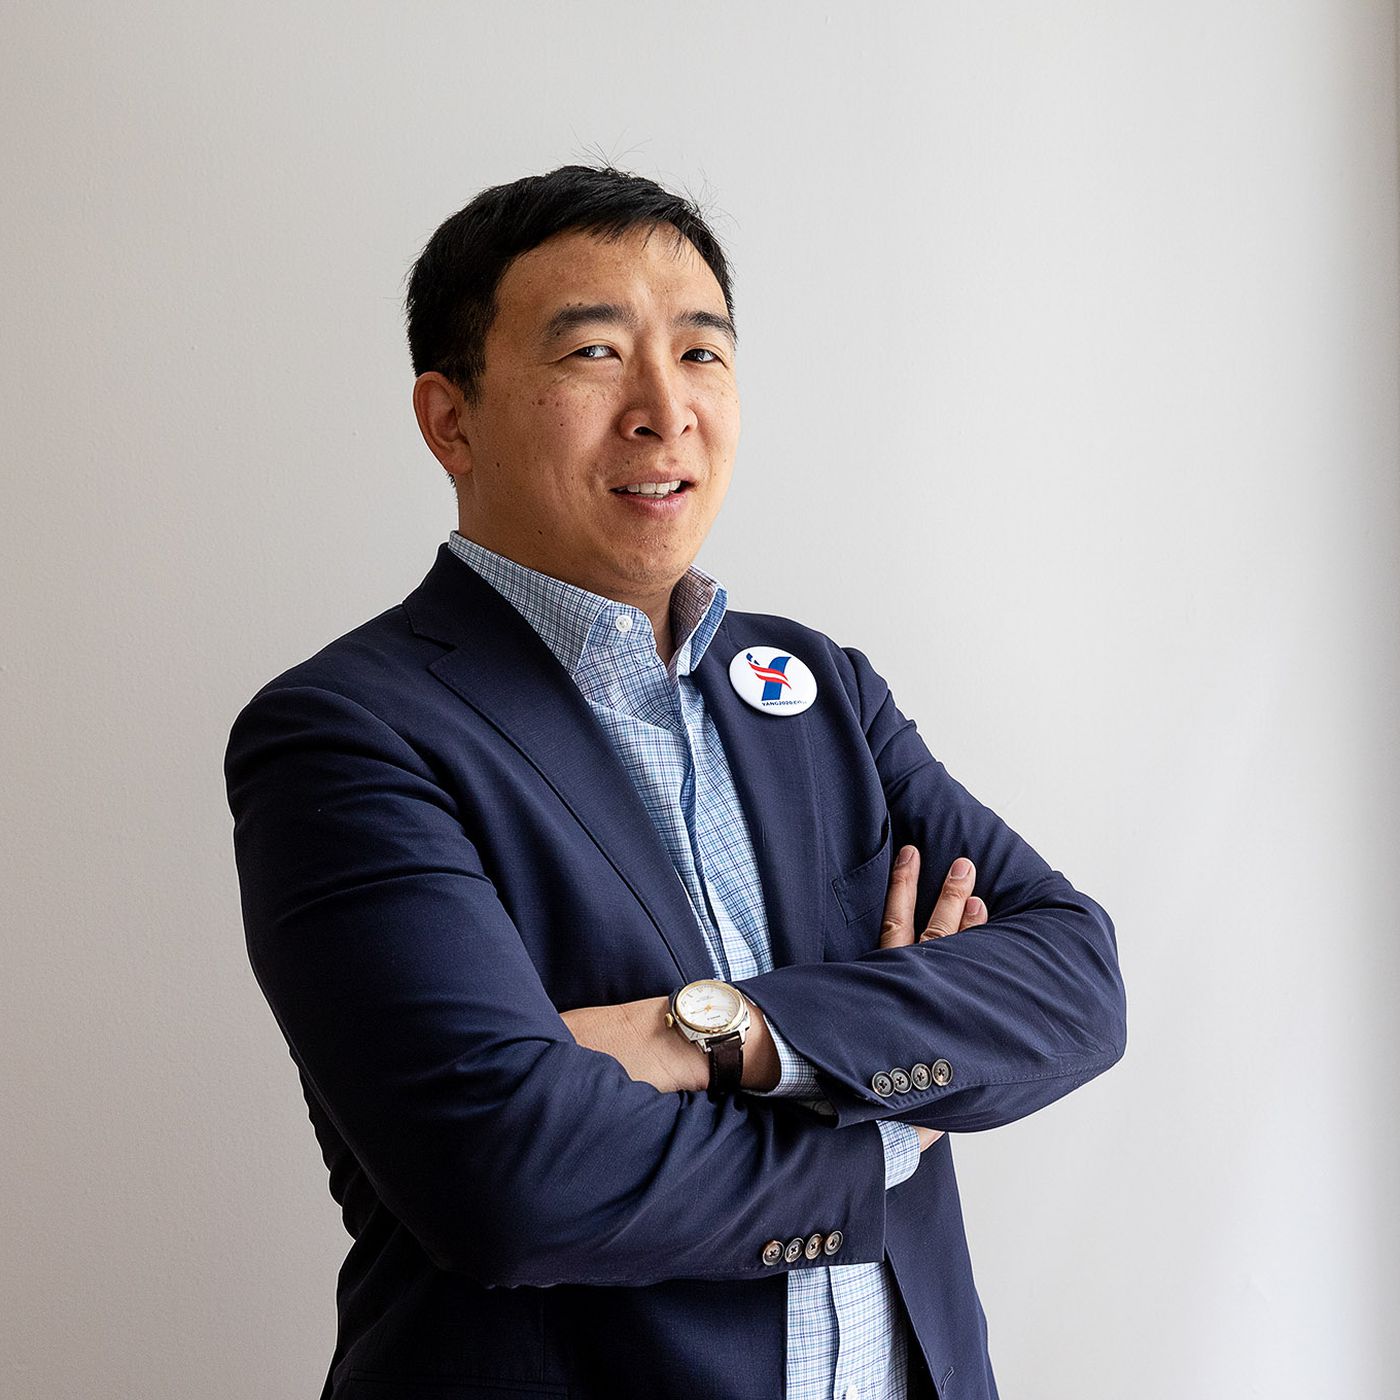 Andrew Yang is the candidate for the end of the world - The Verge